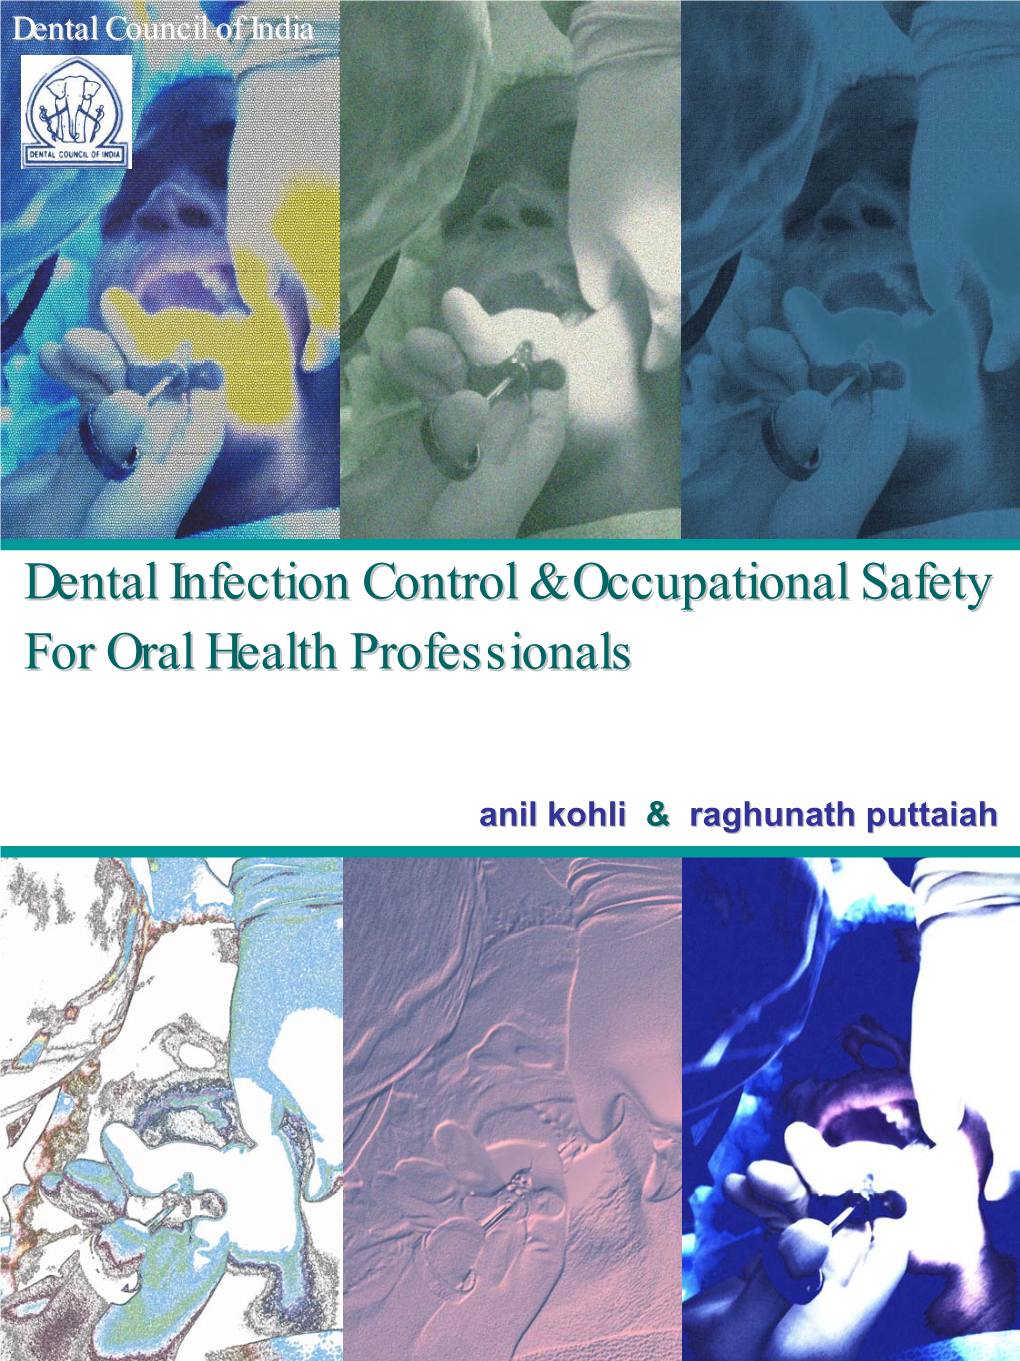 Dental Infection Control & Occupational Safety for Oral Health